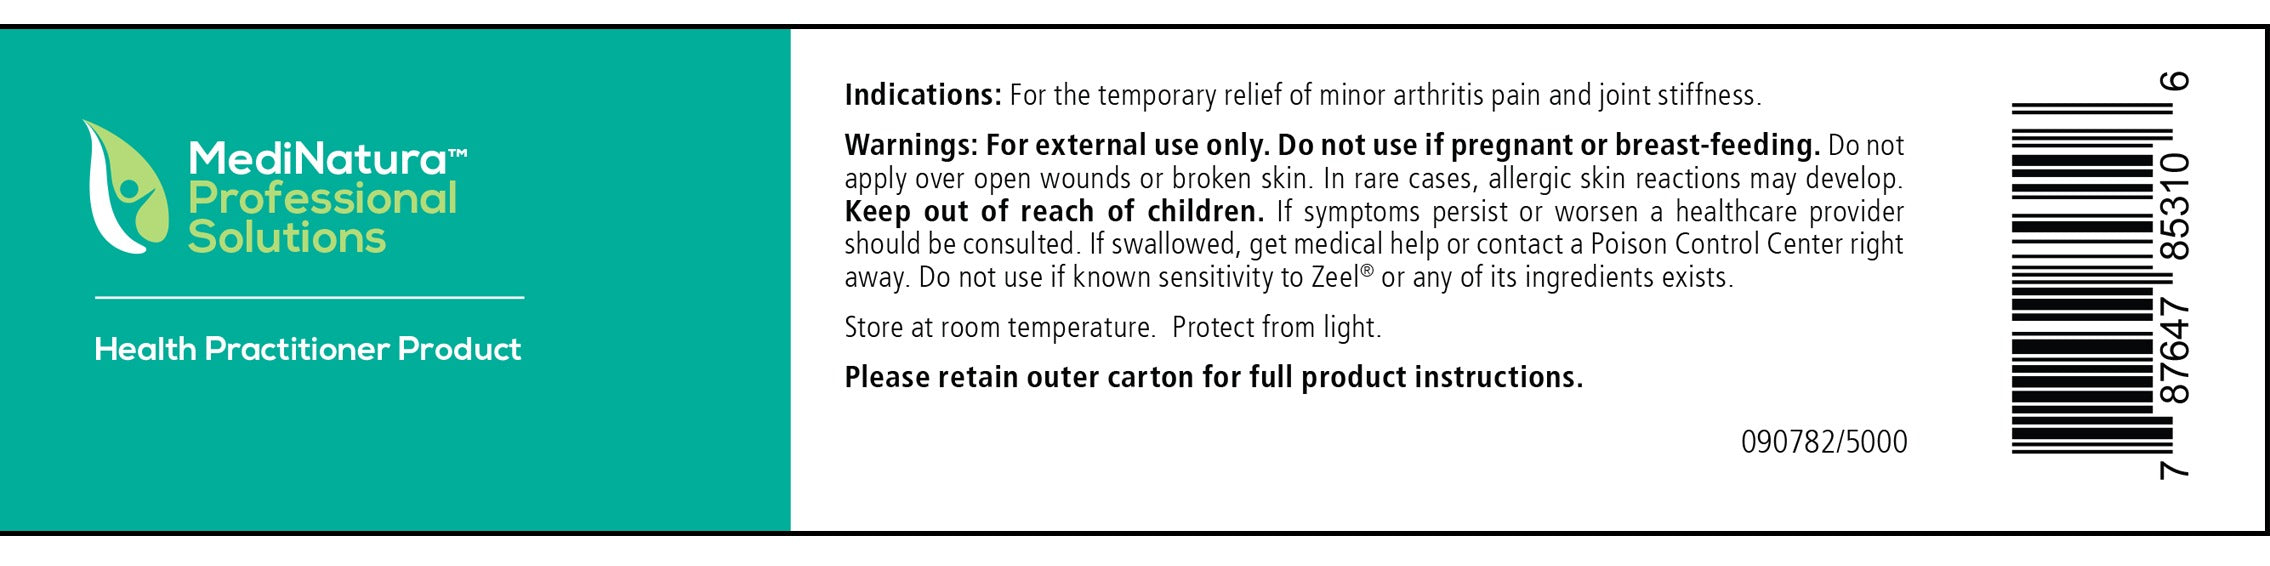 ZEEL Ointment 100g Indications